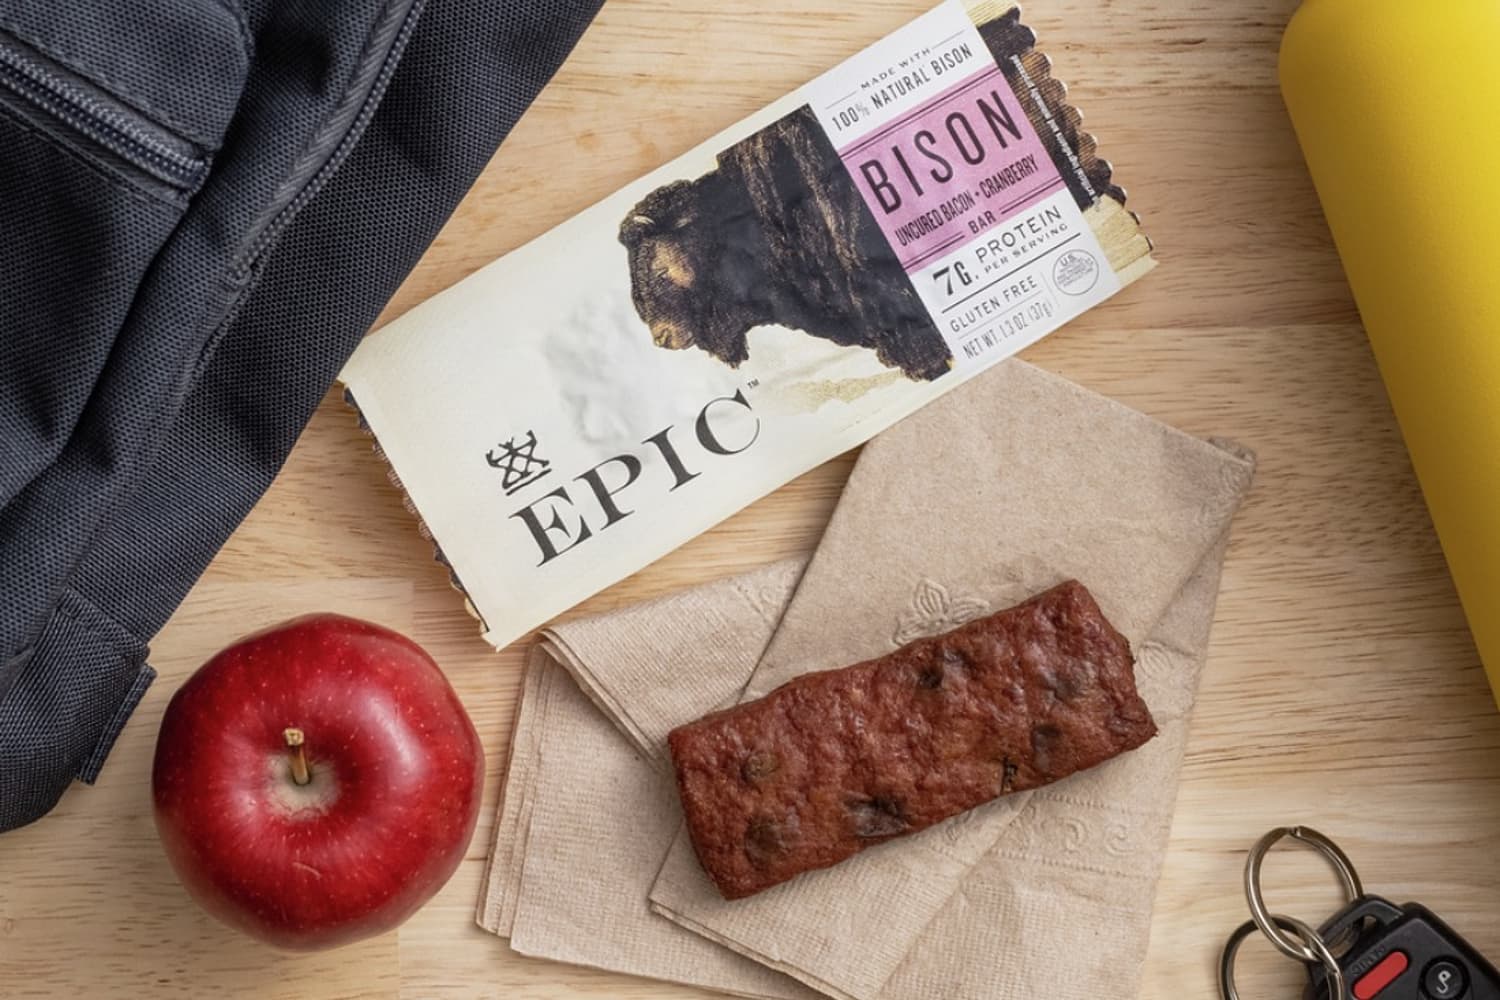 Bison Bacon Cranbery Bar - Protein Meat Bars - EPIC – EPIC Provisions